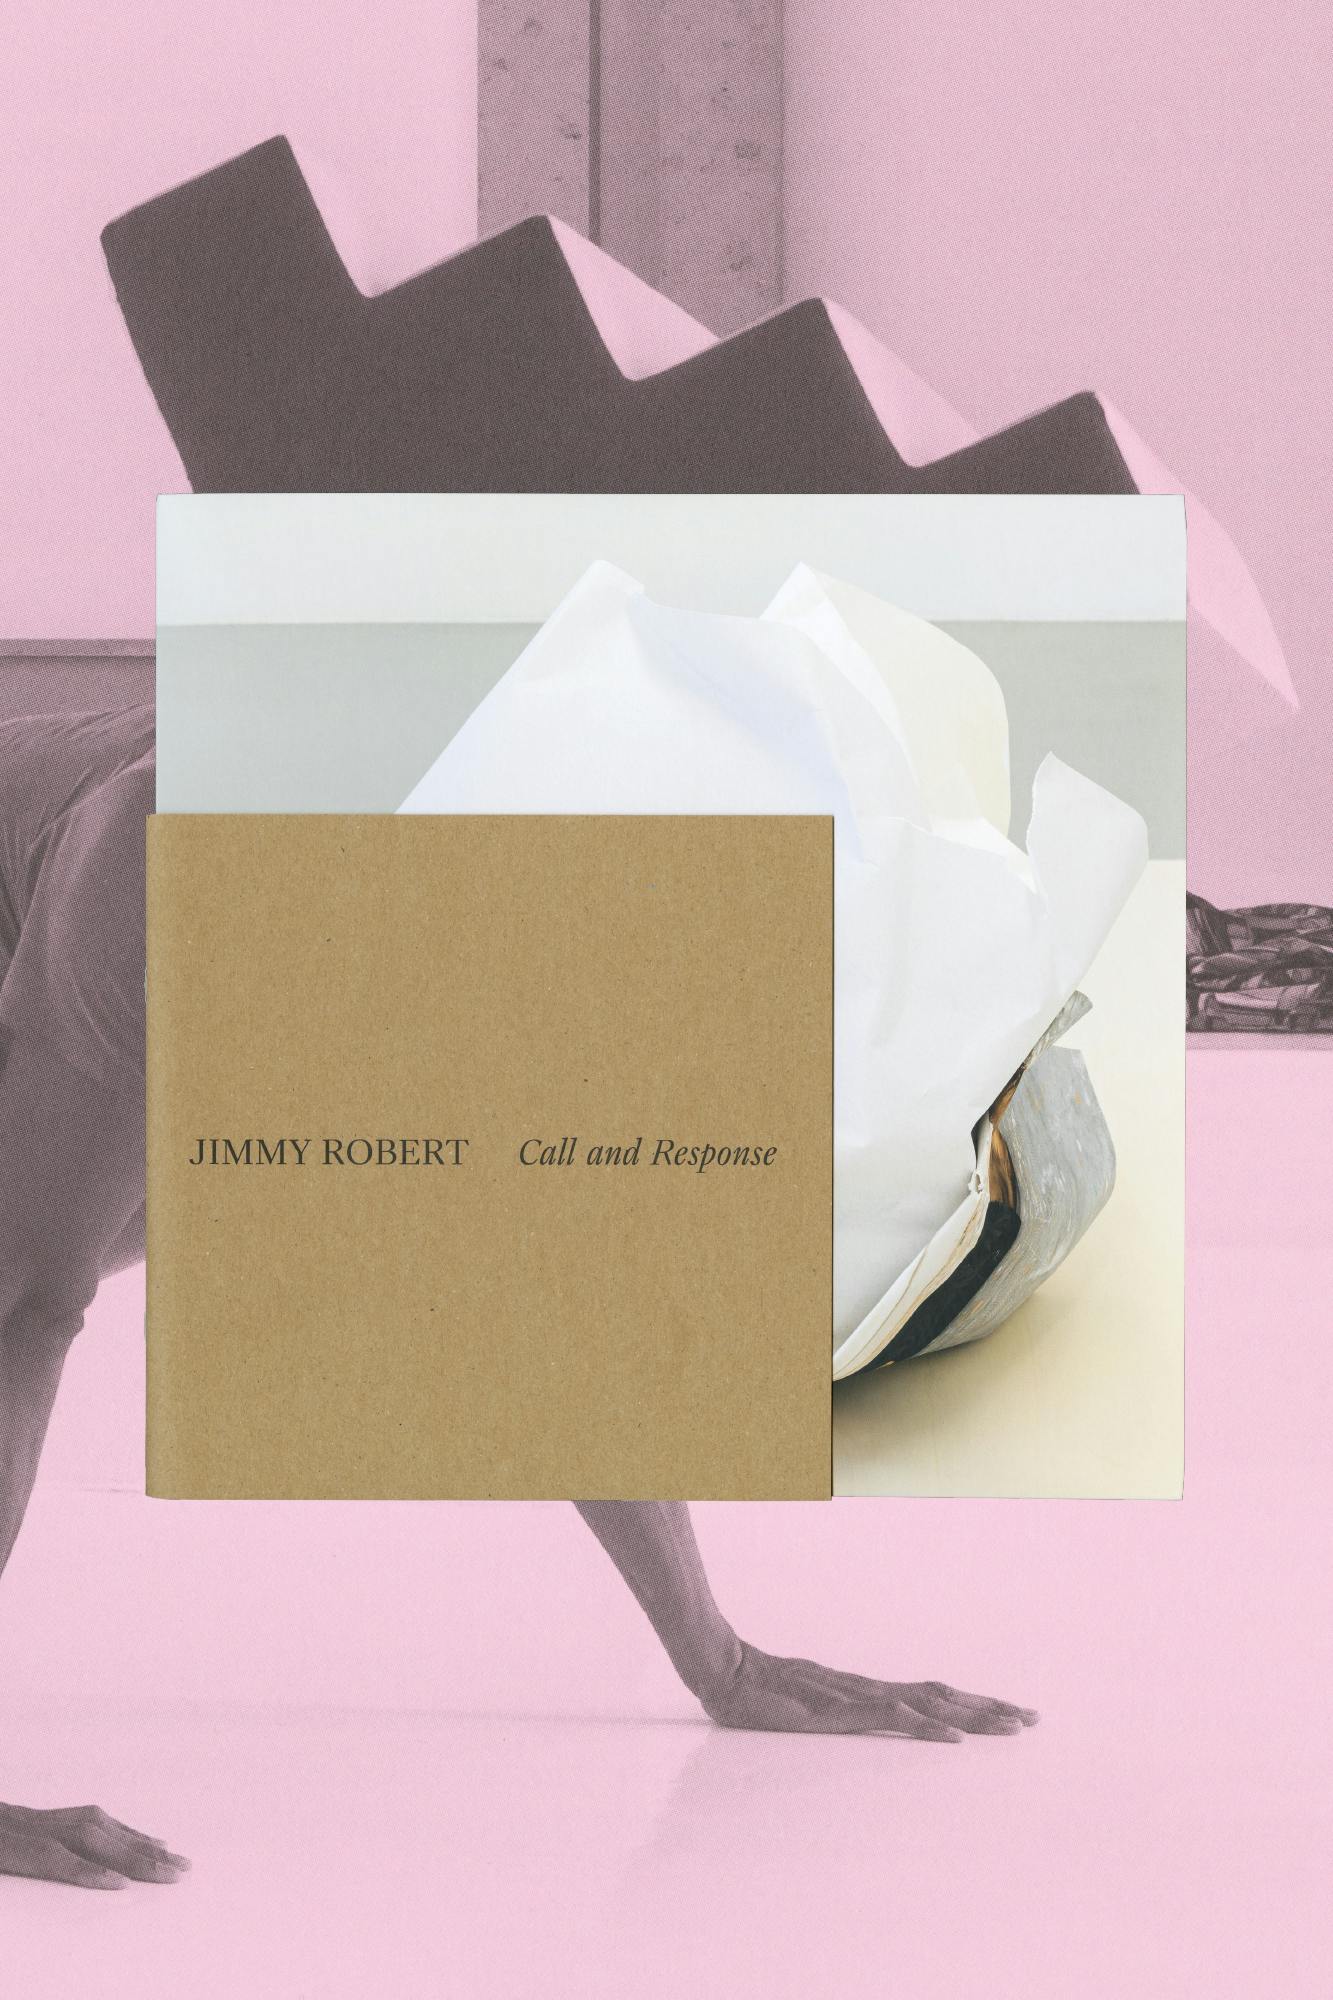 Jimmy Robert, Call and Response, Record, Vinyl, Design by Wolfe Hall